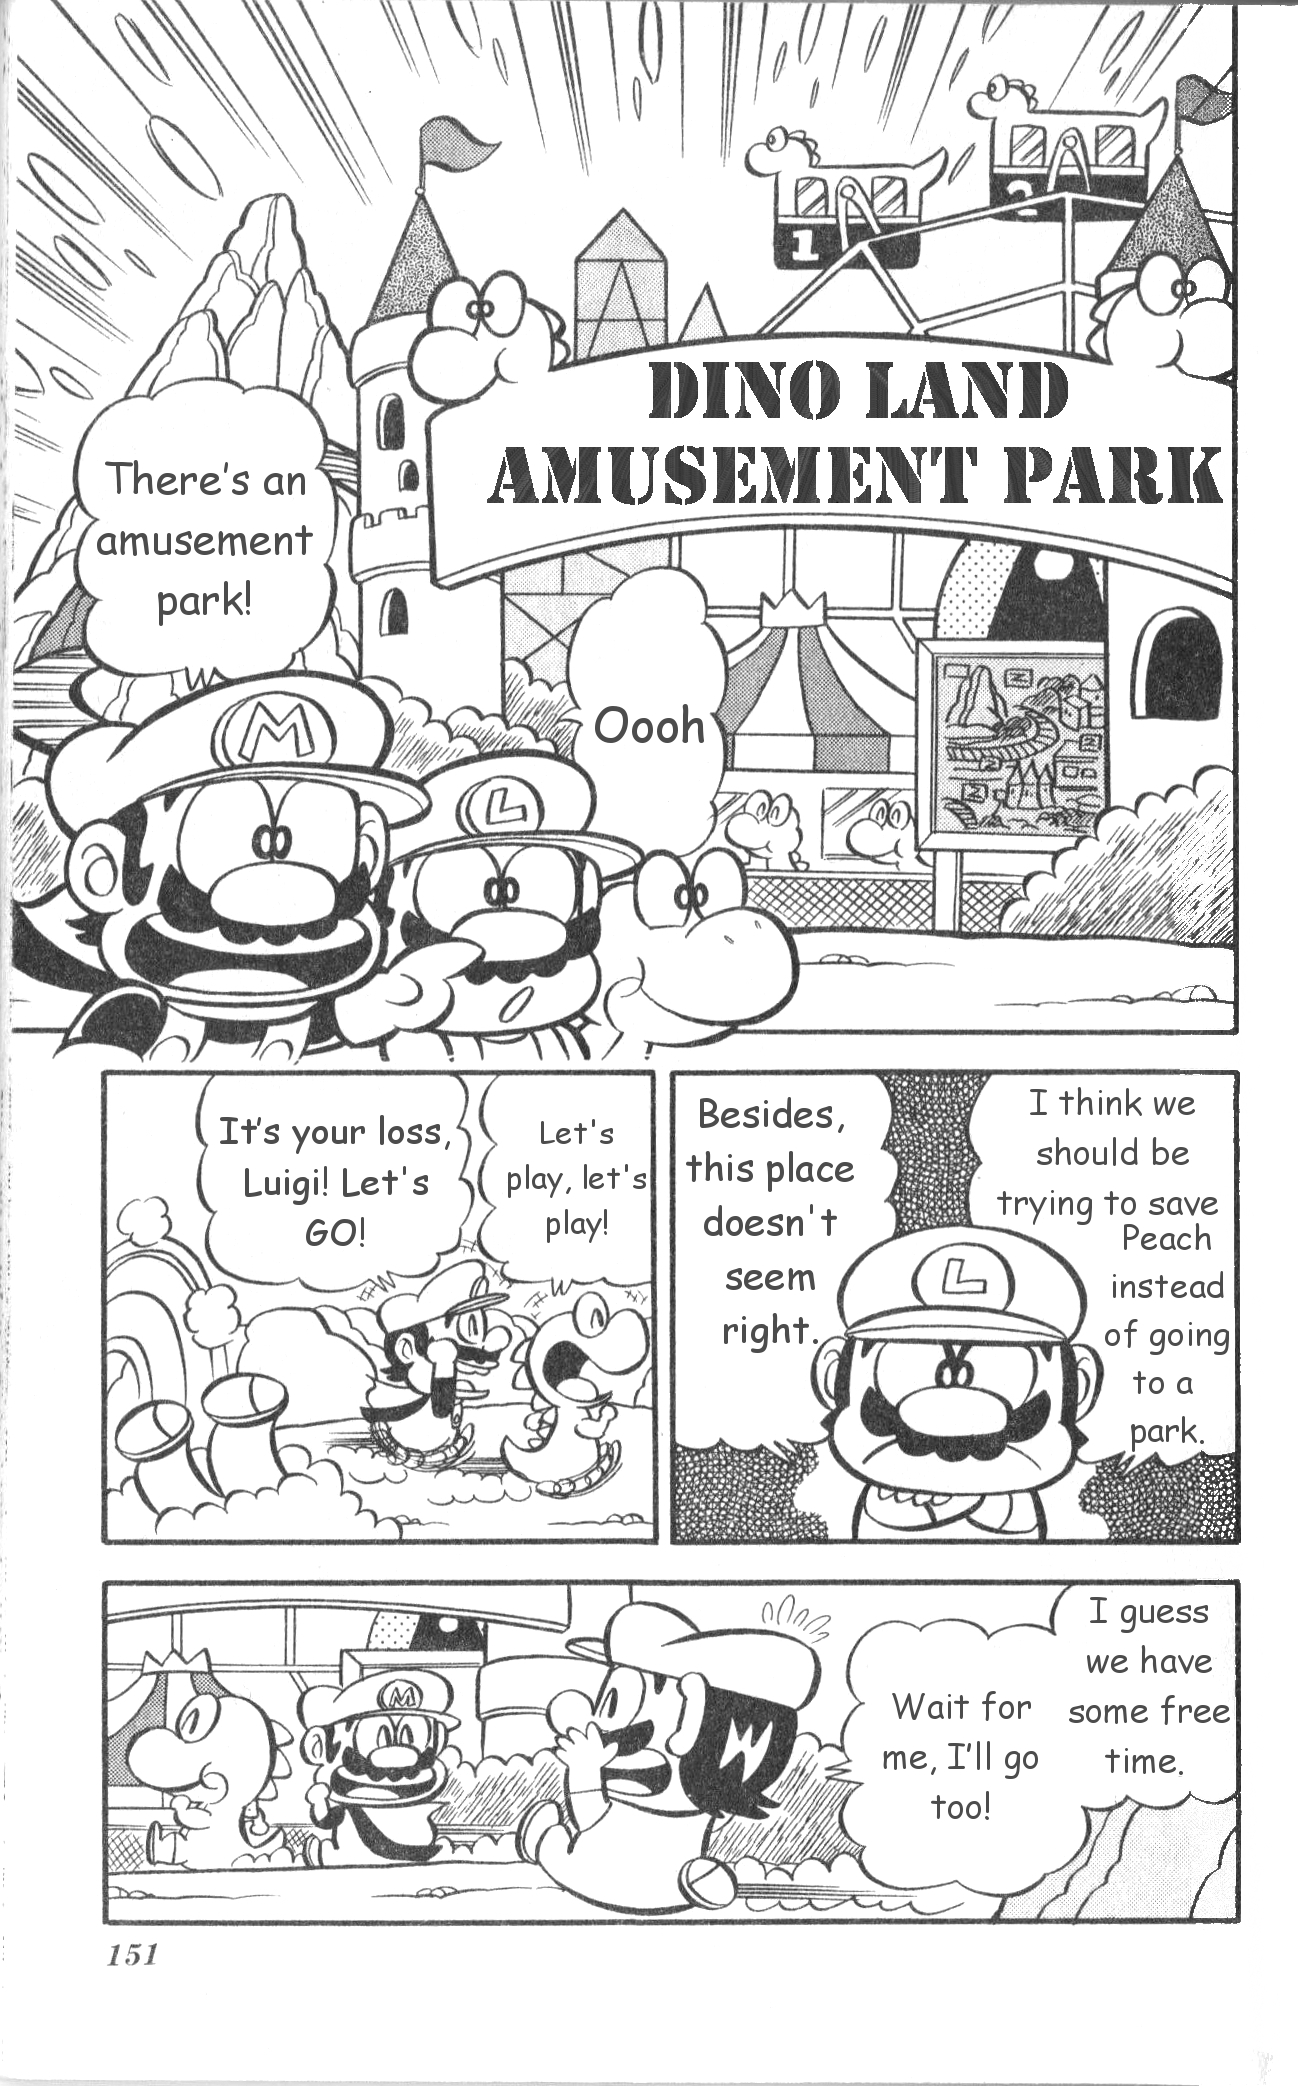 Super Mario-Kun Vol.1 Chapter 13: Kamek Comes Again! The Amusement Park From Hell?! - Picture 2